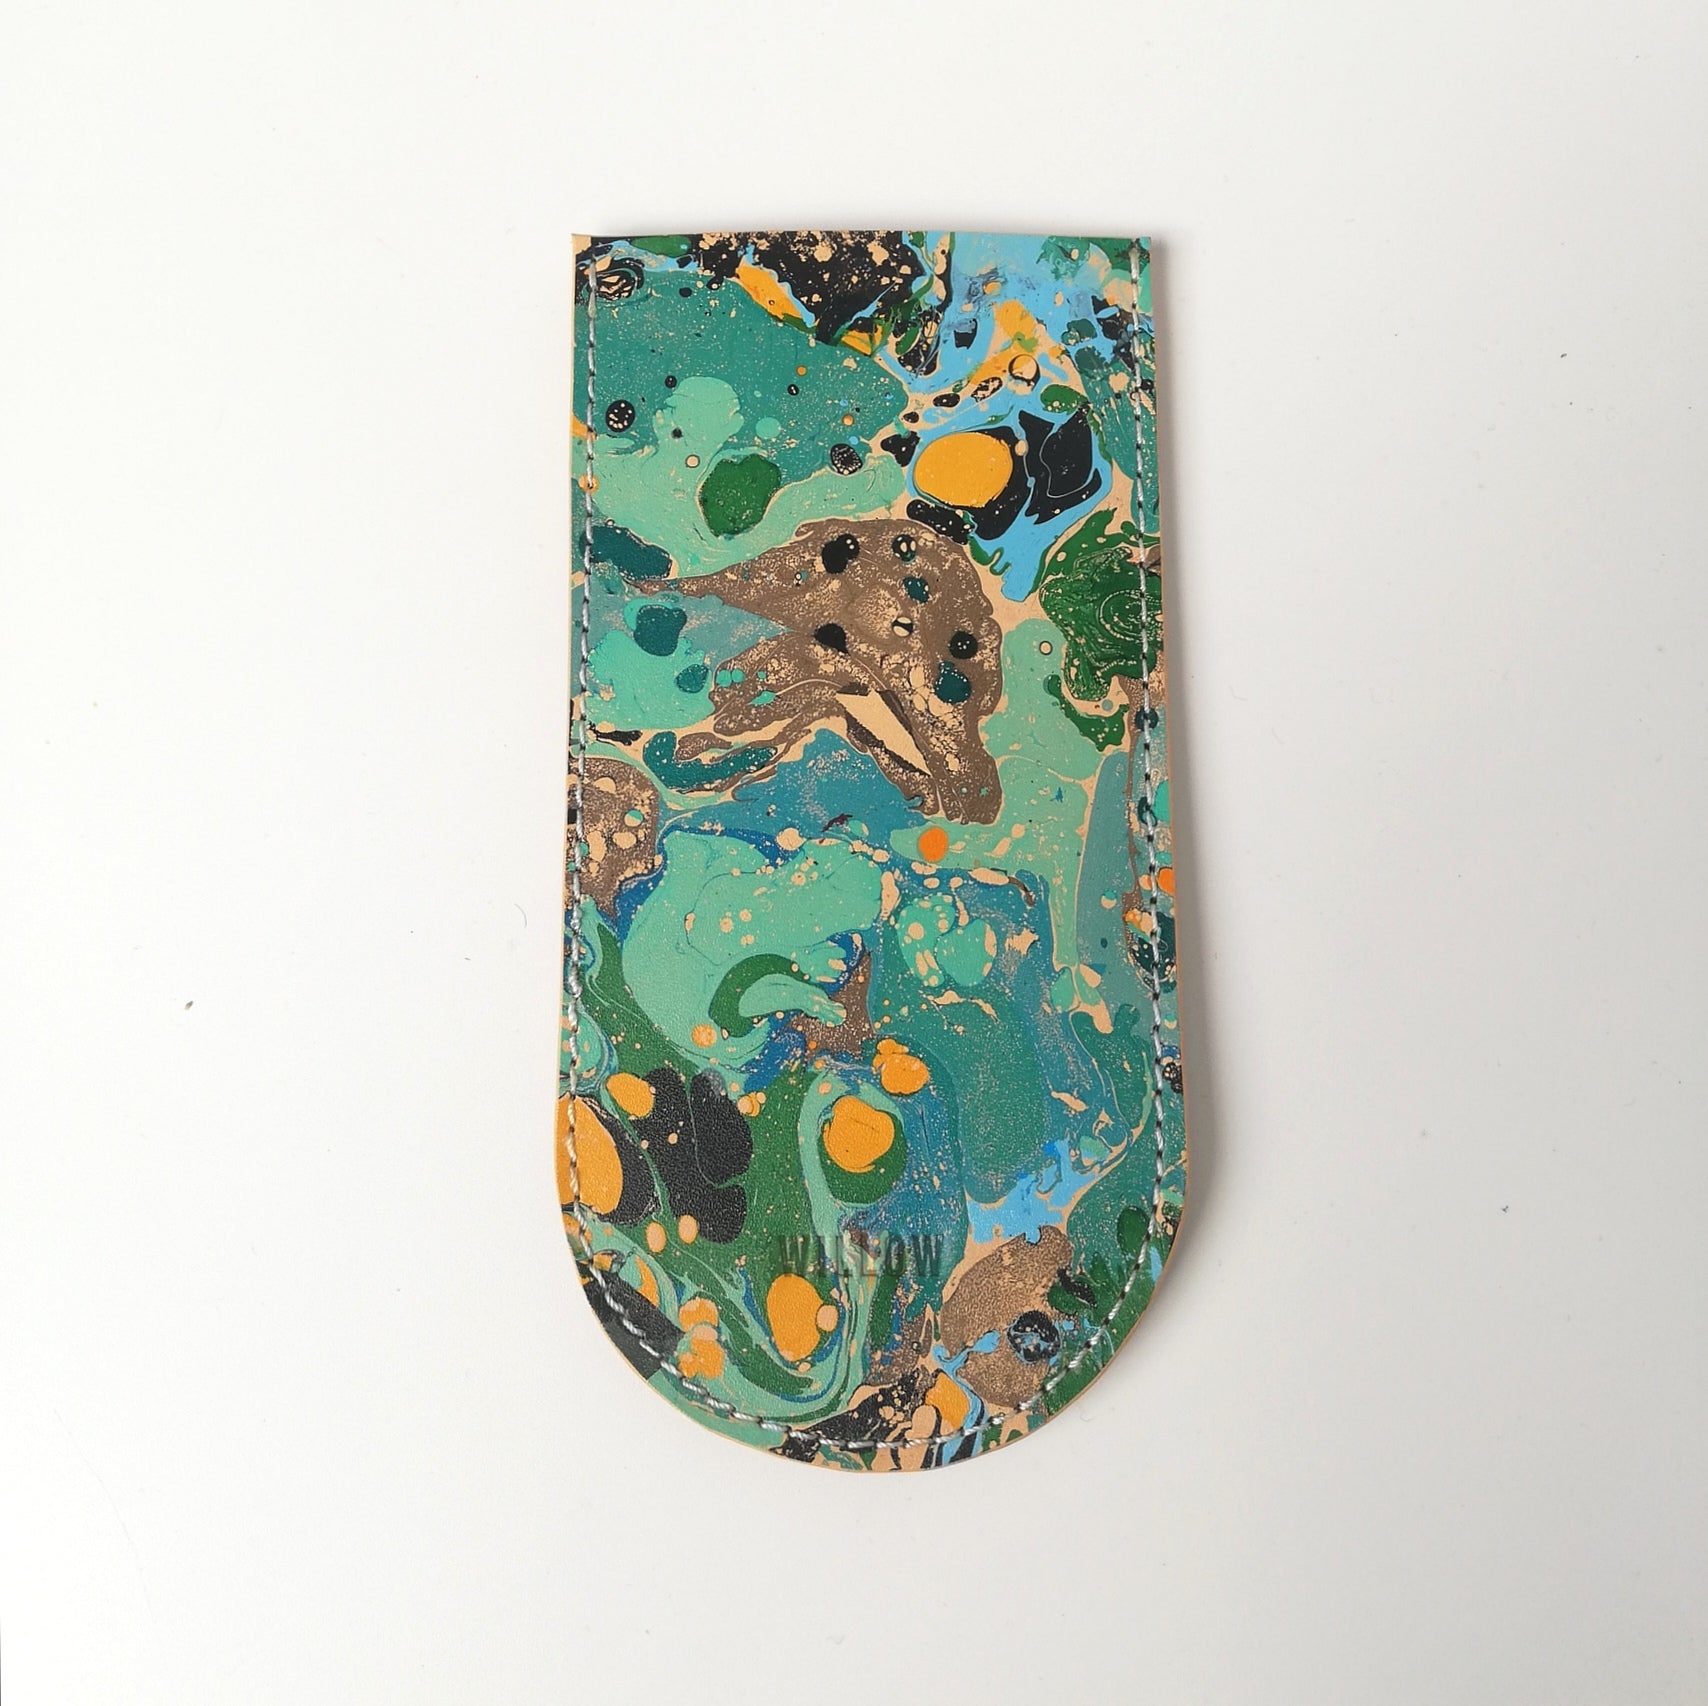 Handmade Marbled Leather Glasses Case